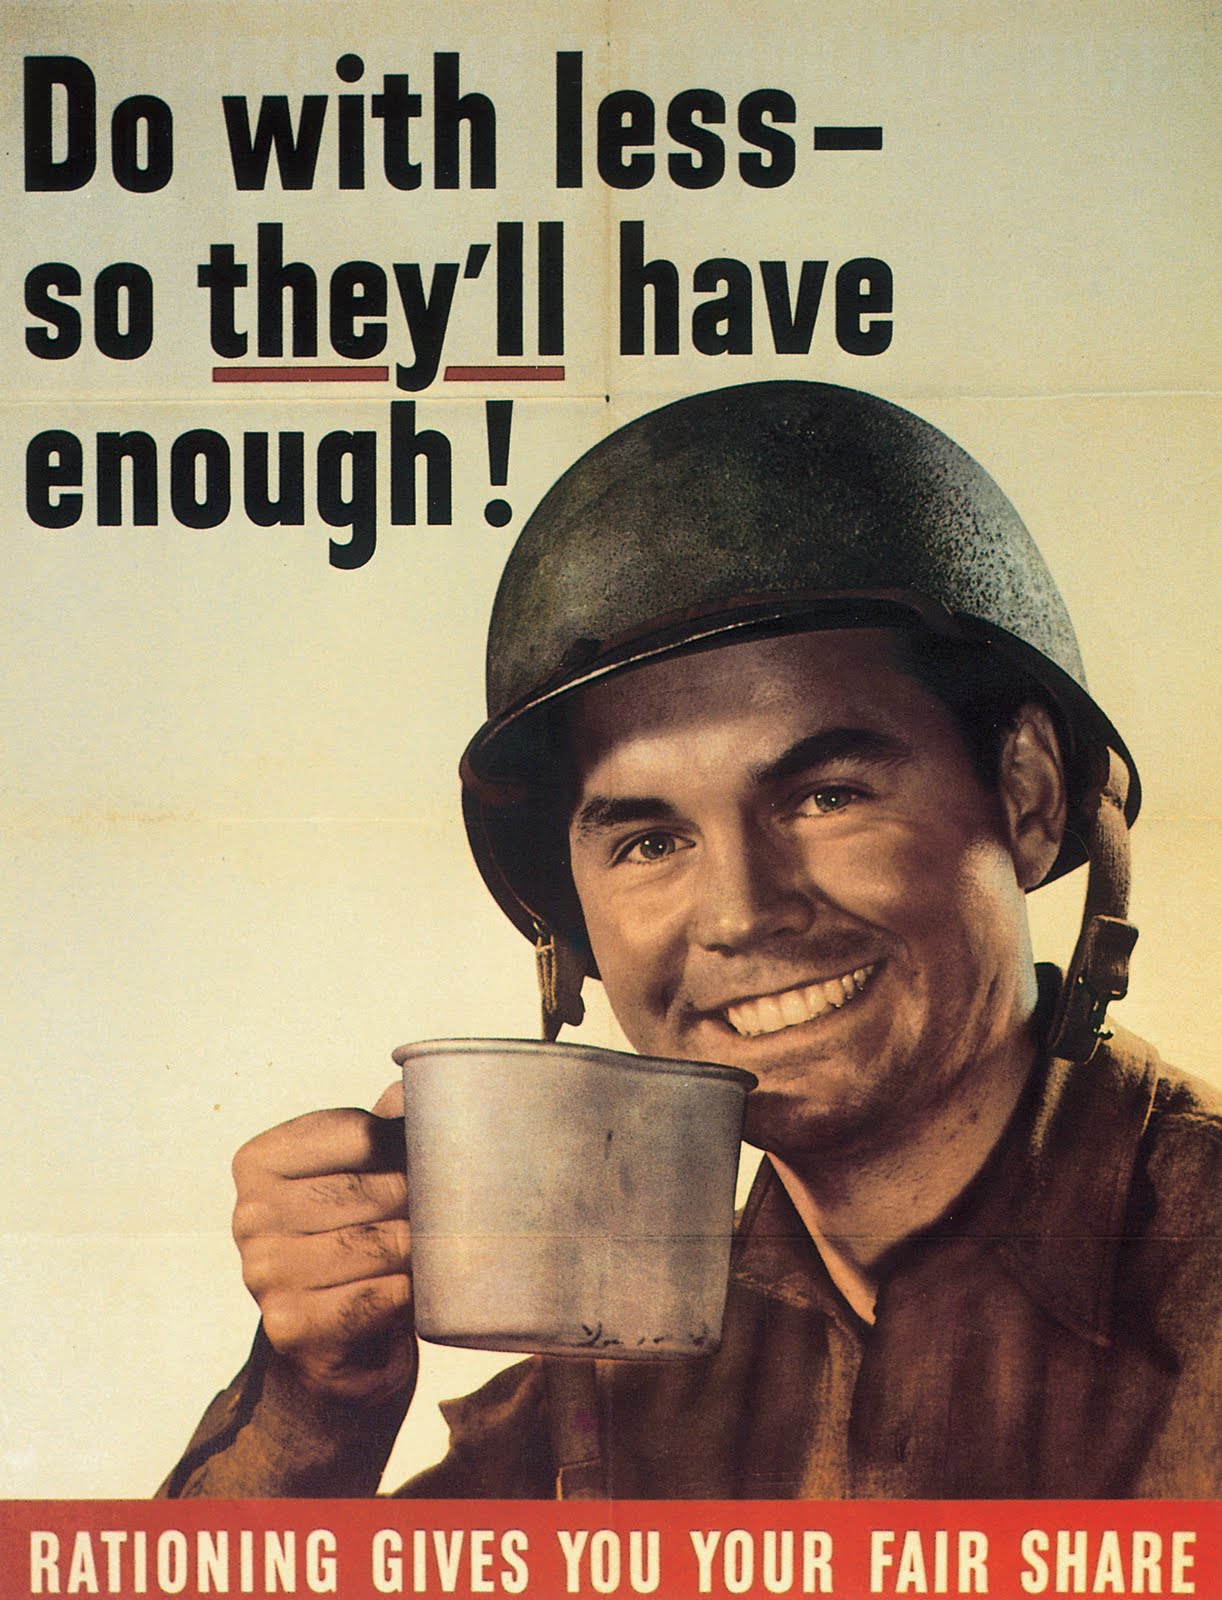 Under His Wings: Make It Do - Coffee Rationing in World War II